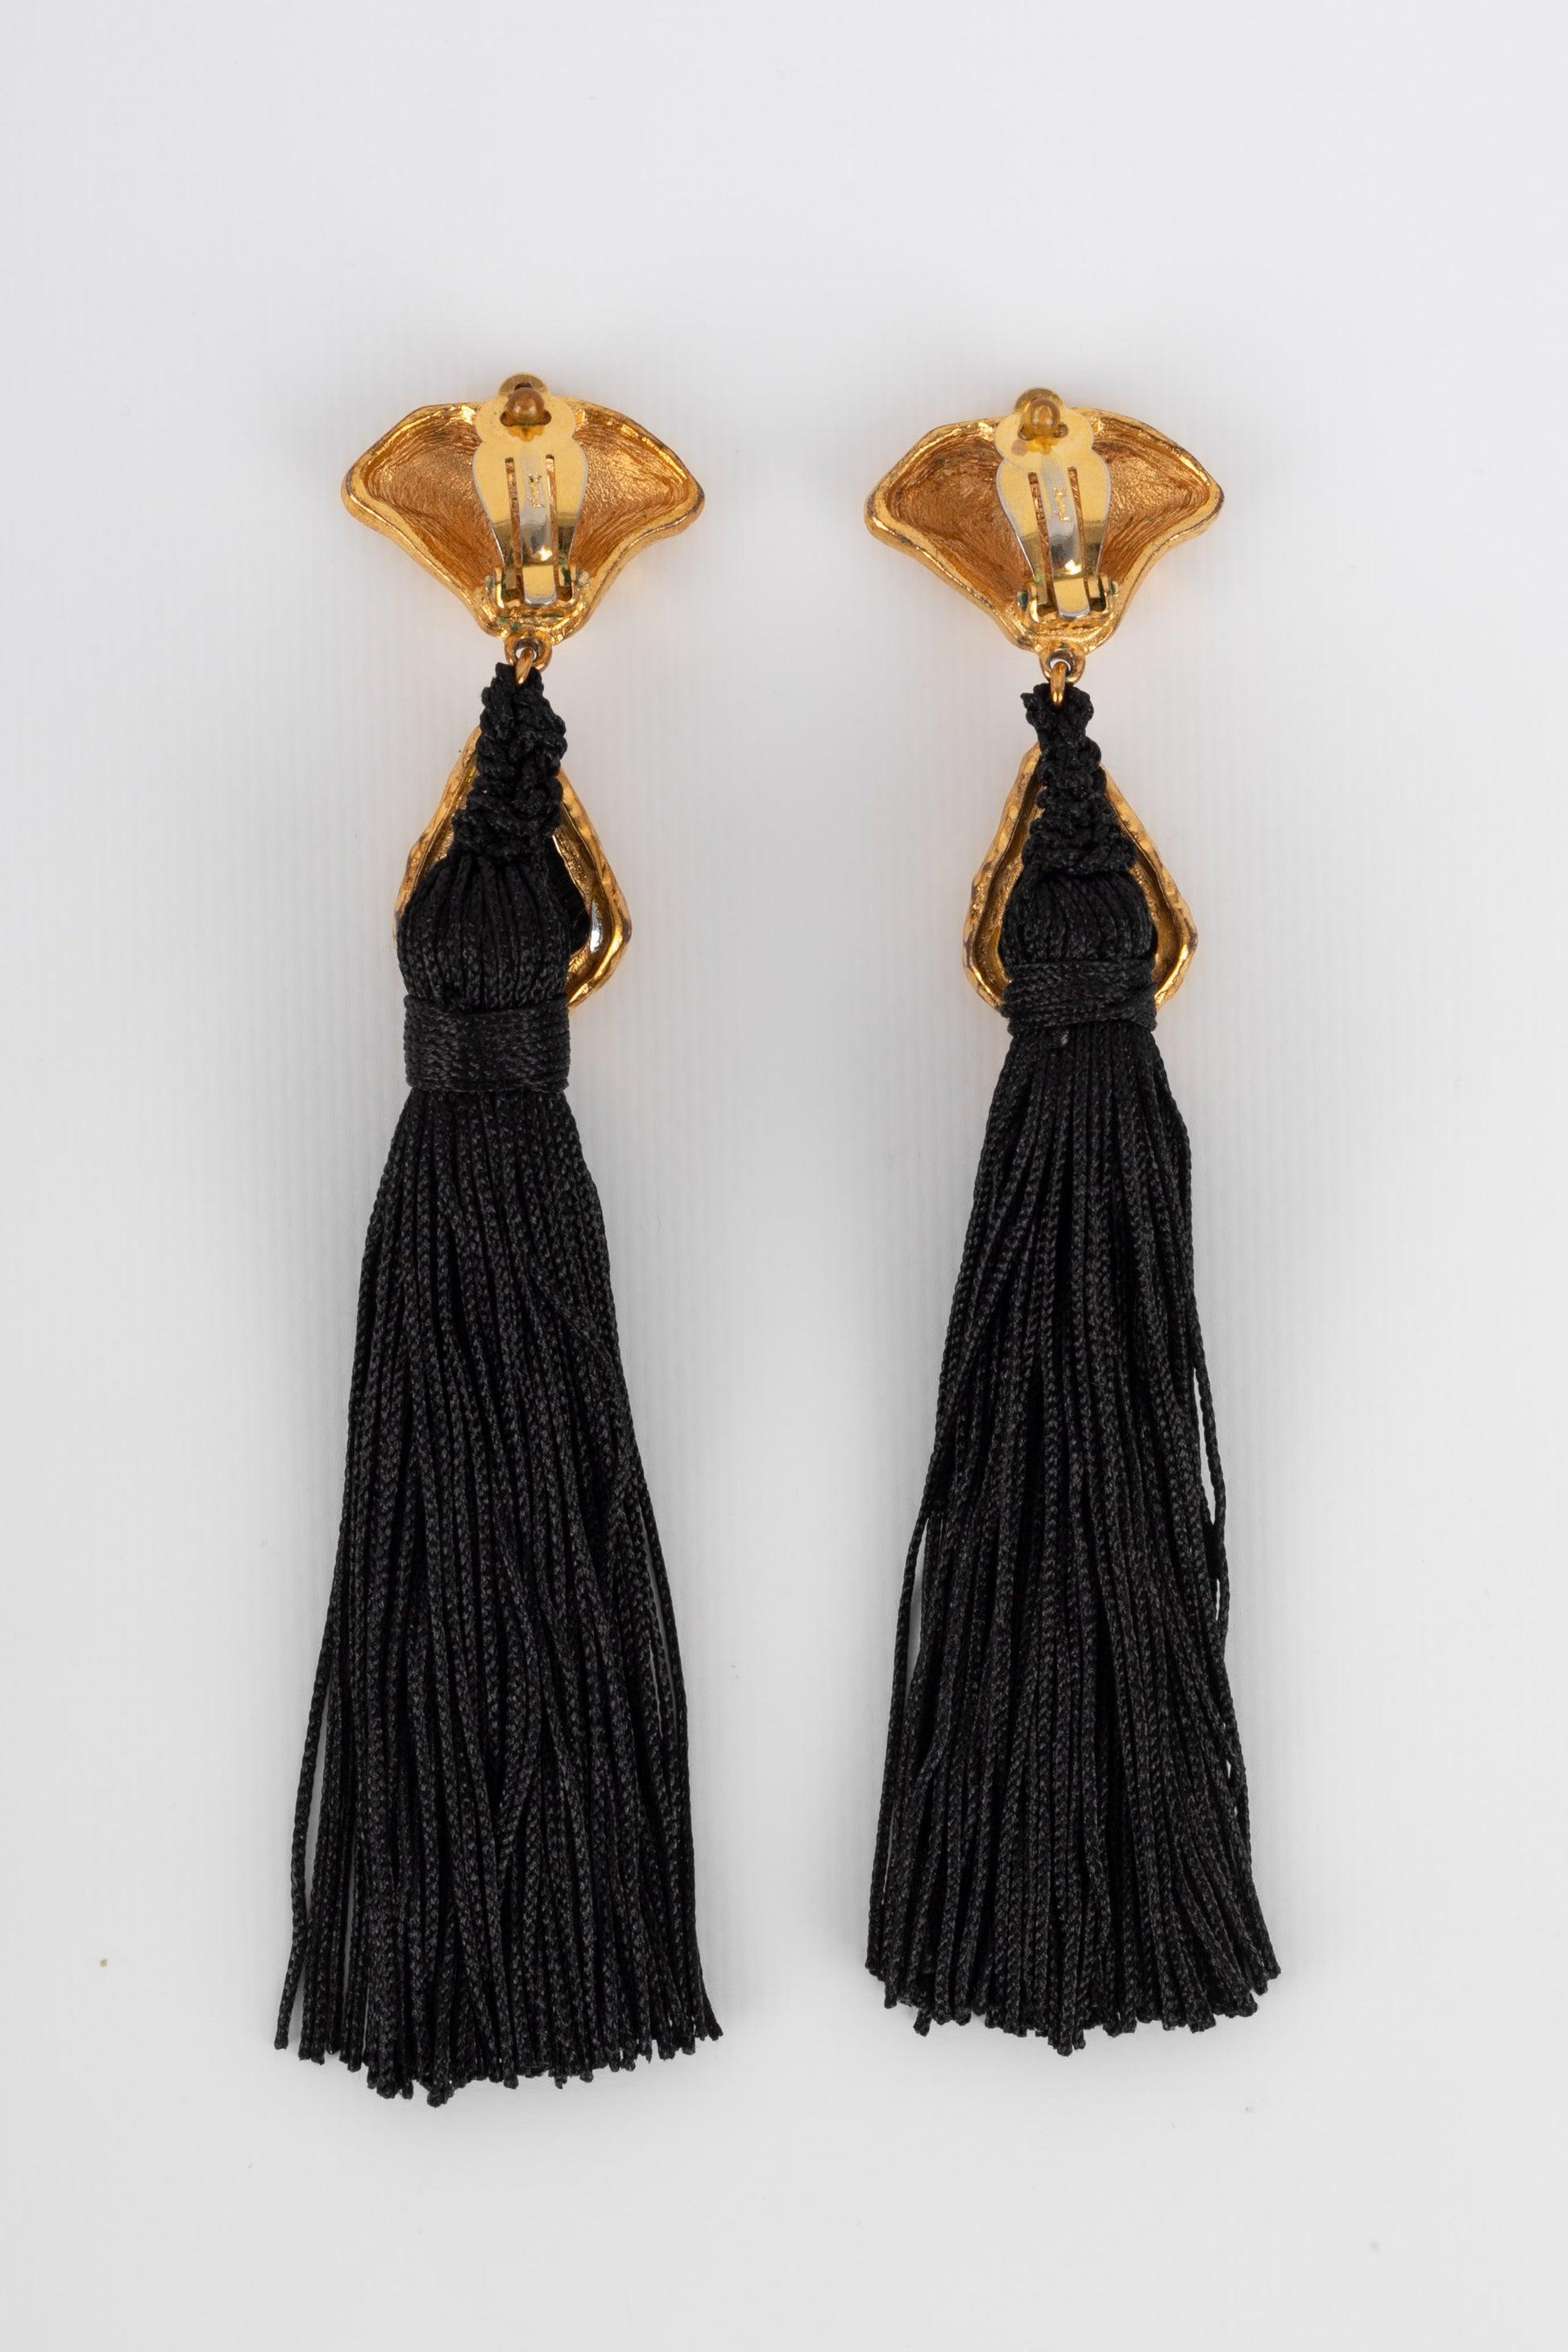 Yves Saint Laurent Golden Metal and Resin Earrings with Black Trimmings Pompom In Excellent Condition For Sale In SAINT-OUEN-SUR-SEINE, FR